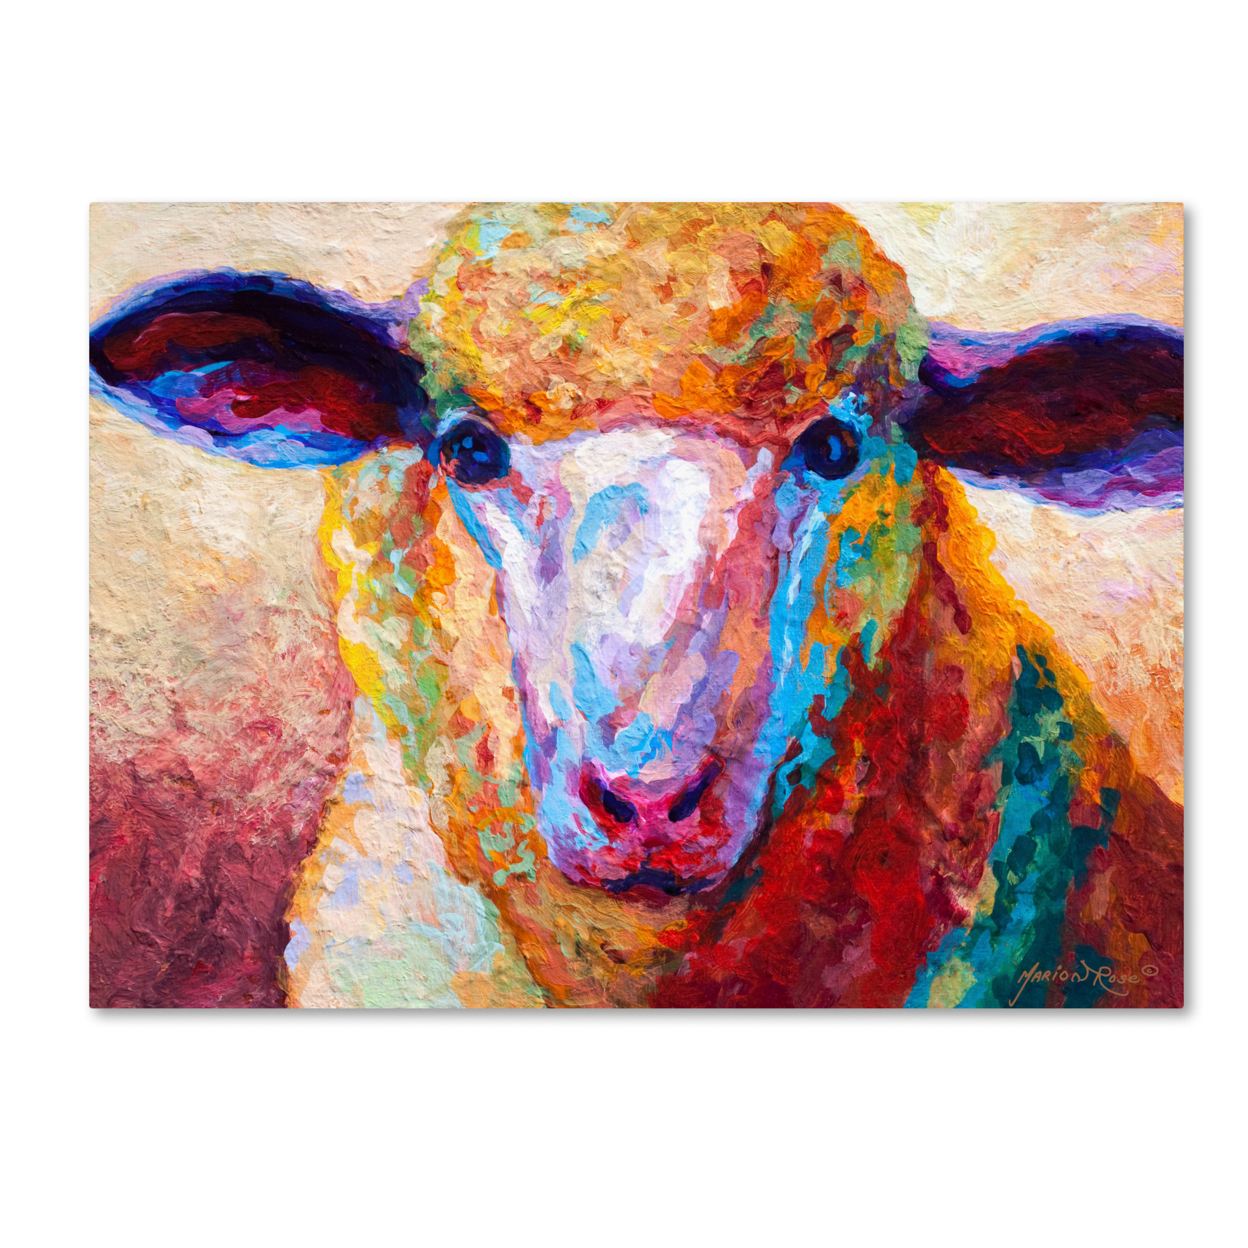 Marion Rose 'Dorset Ewe' Ready To Hang Canvas Art 35 X 47 Inches Made In USA